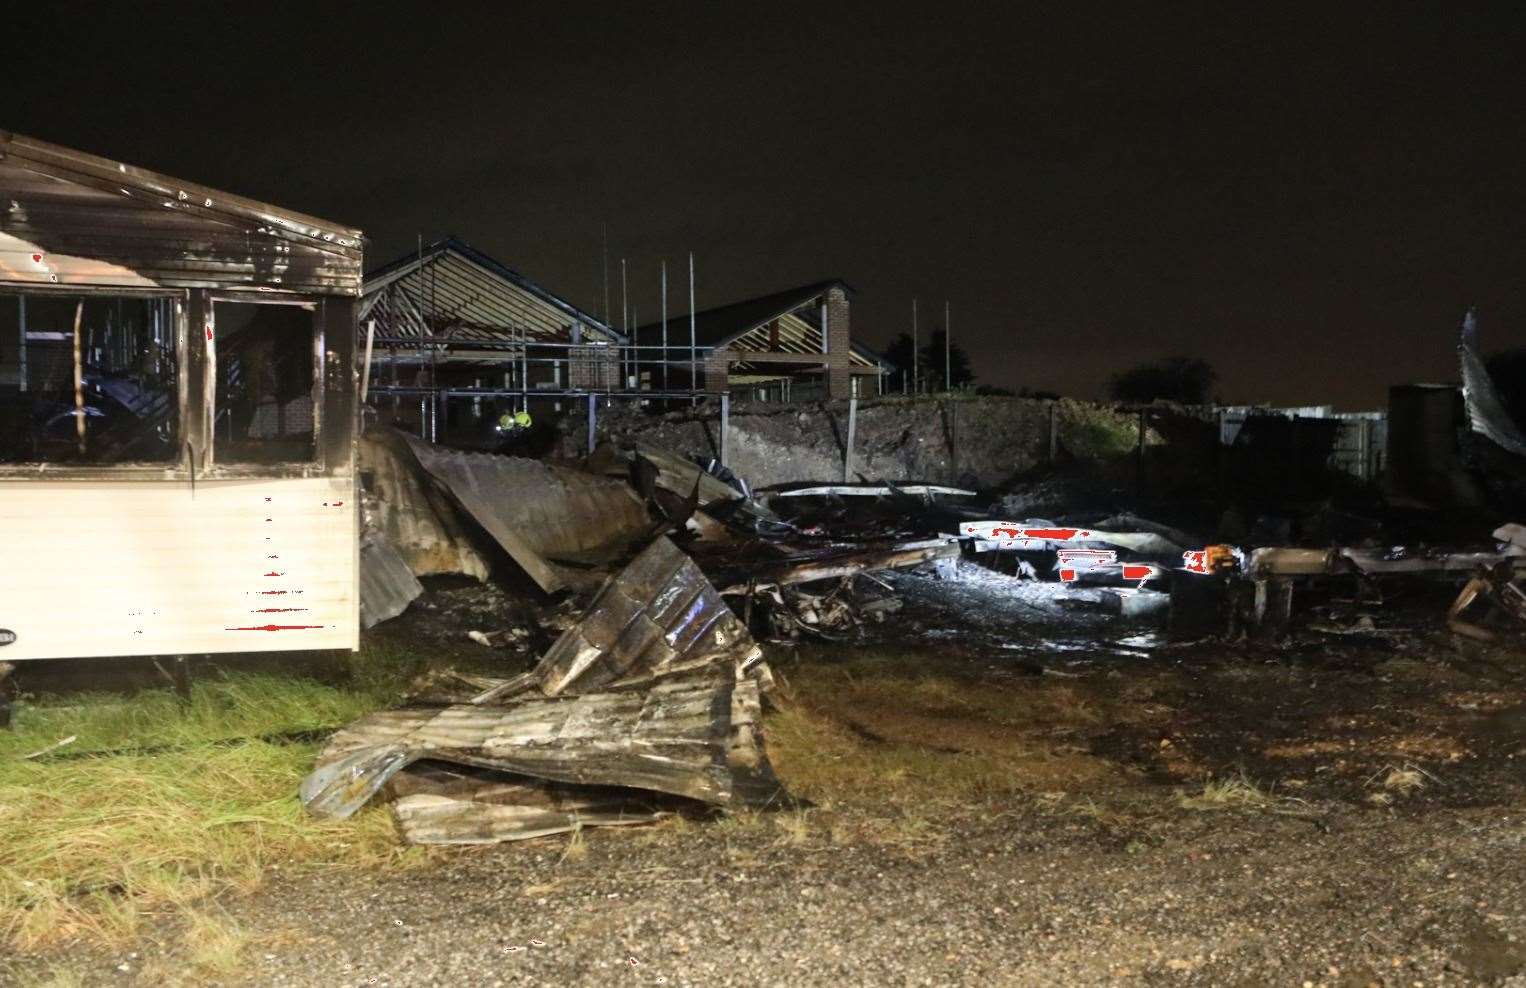 Pictures taken just before midnight show the devastation caused. Pics: UKNIP